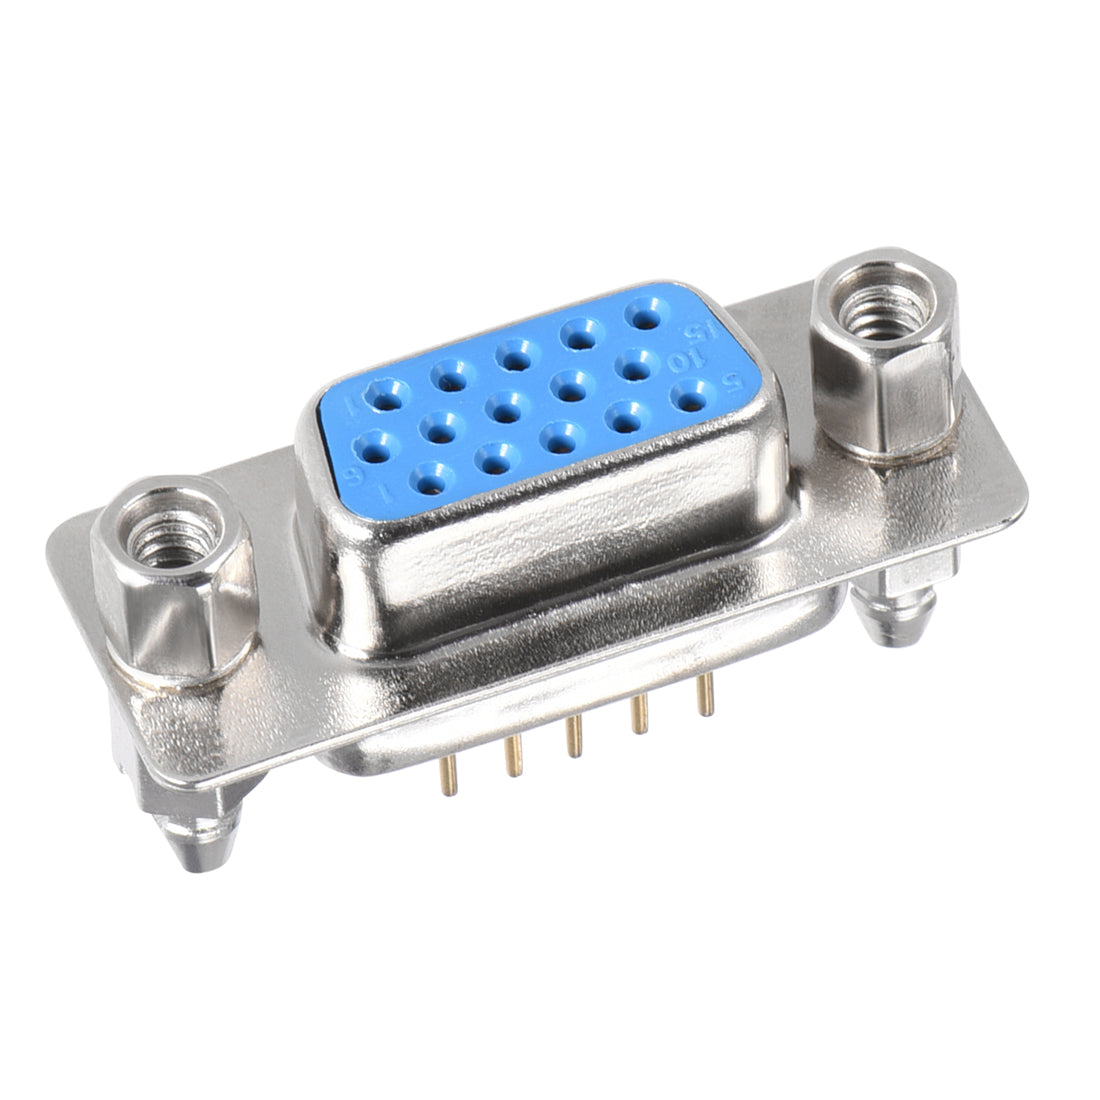 uxcell Uxcell D-sub Connector Female Socket 15-position 3-row Board Lock Port Terminal Breakout for Mechanical Equipment Blue 5pcs